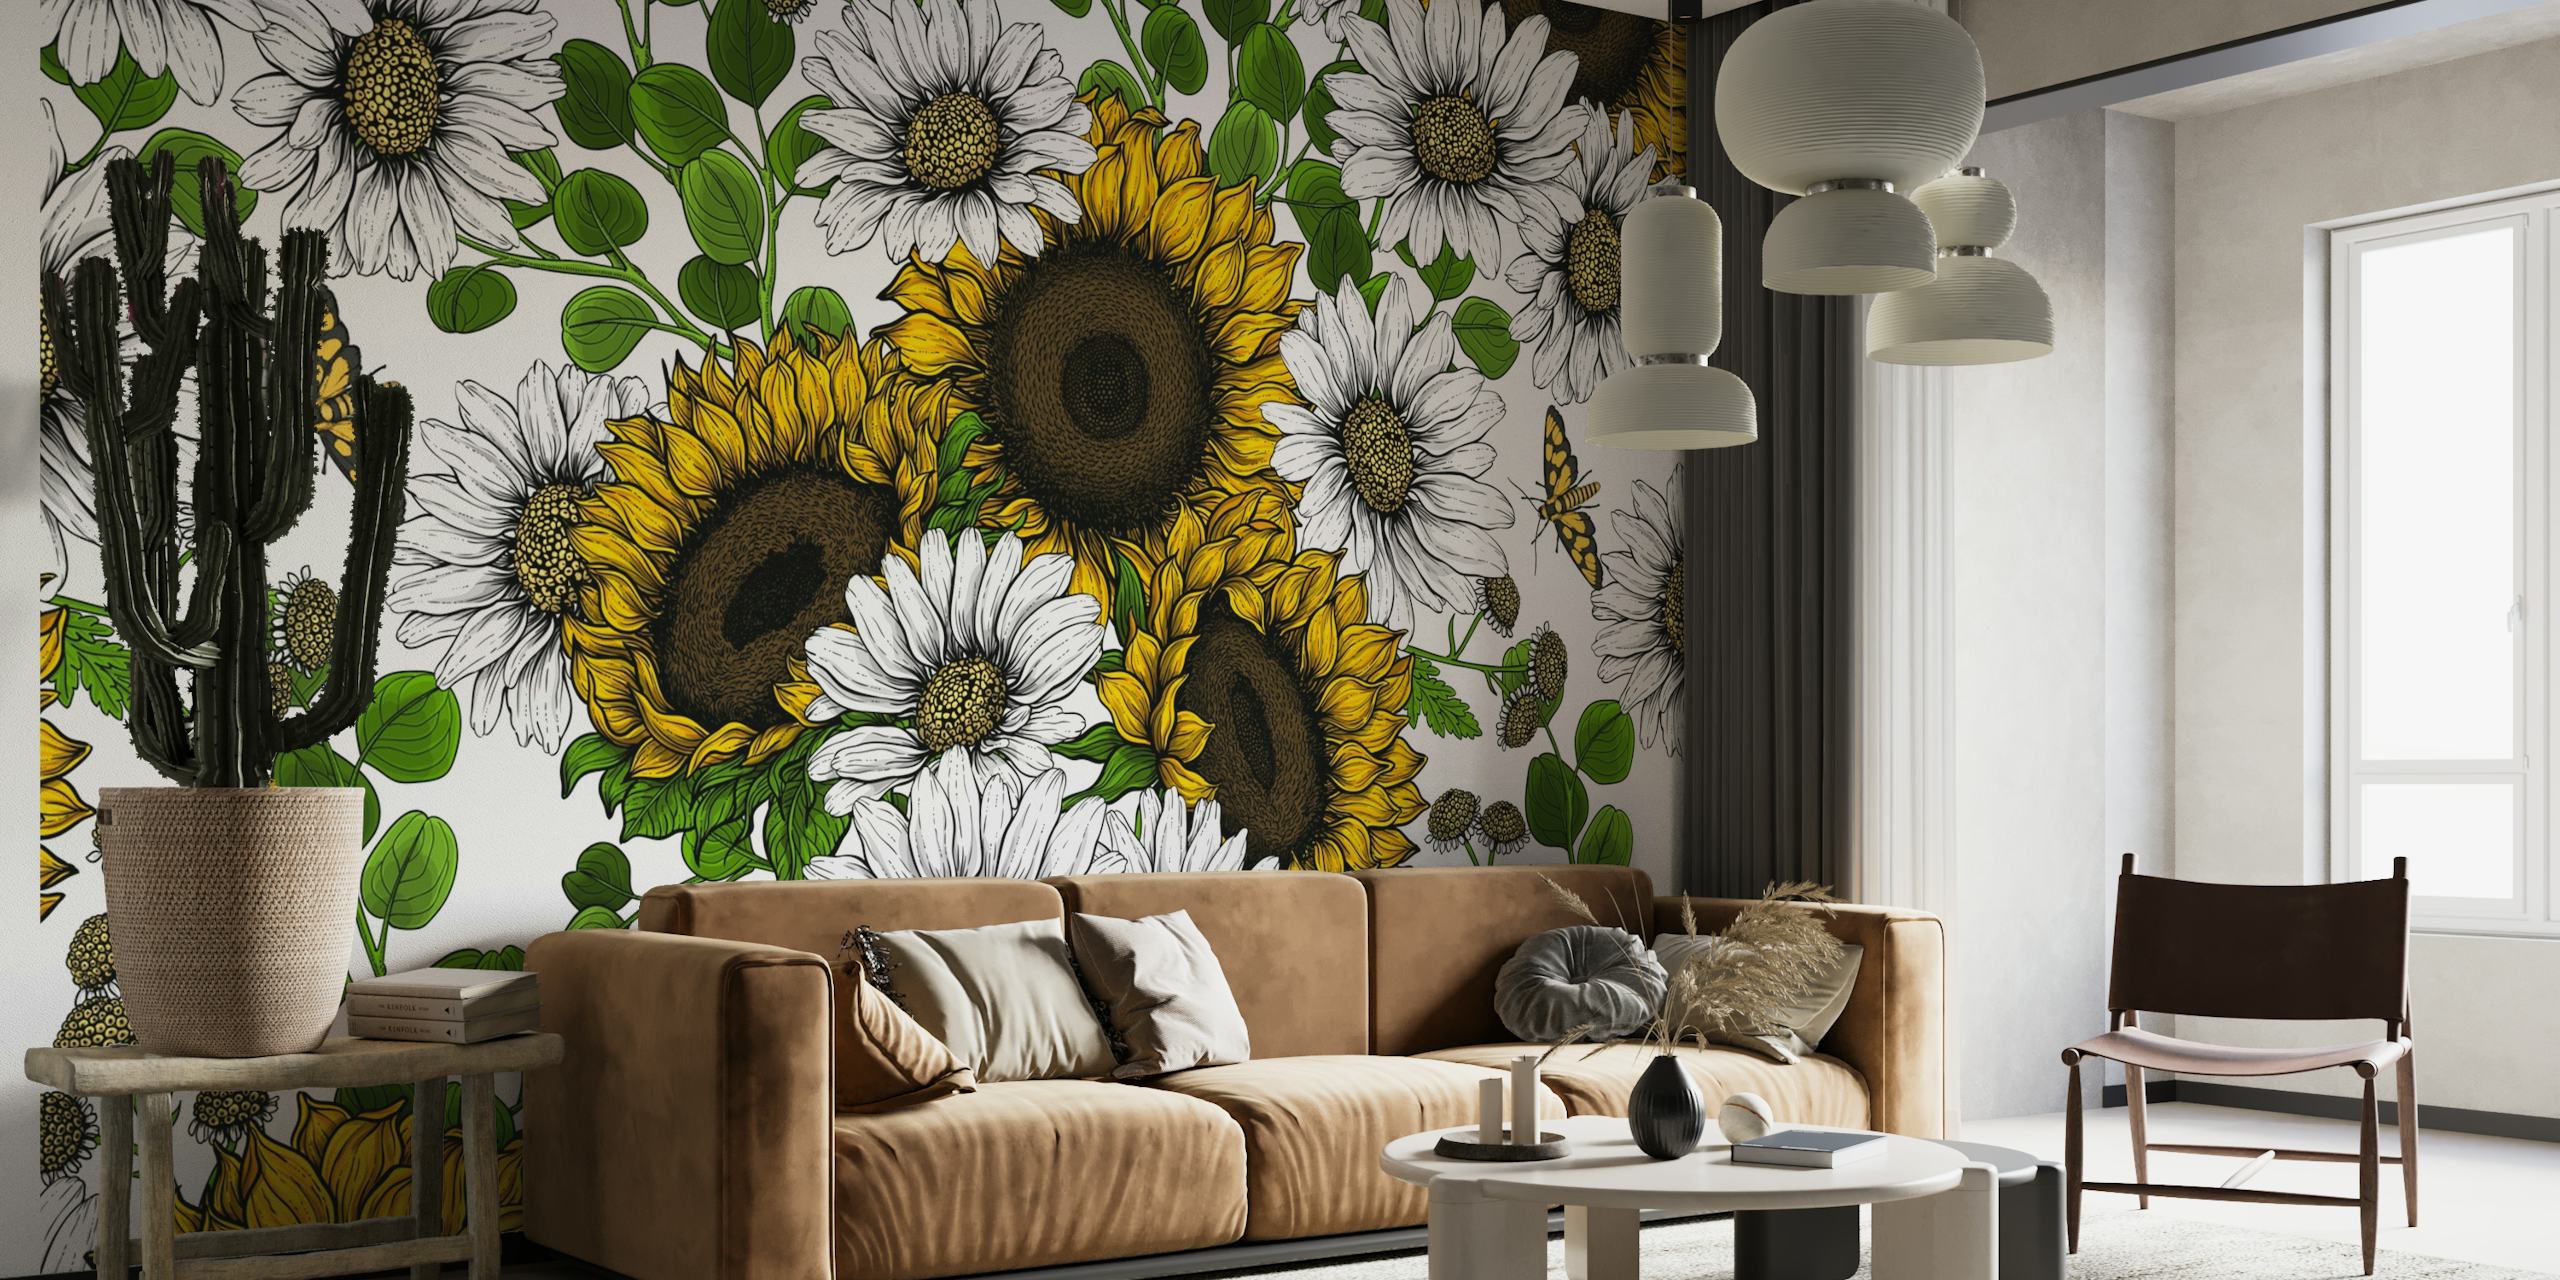 Sunflowers and daisies 3 wallpaper